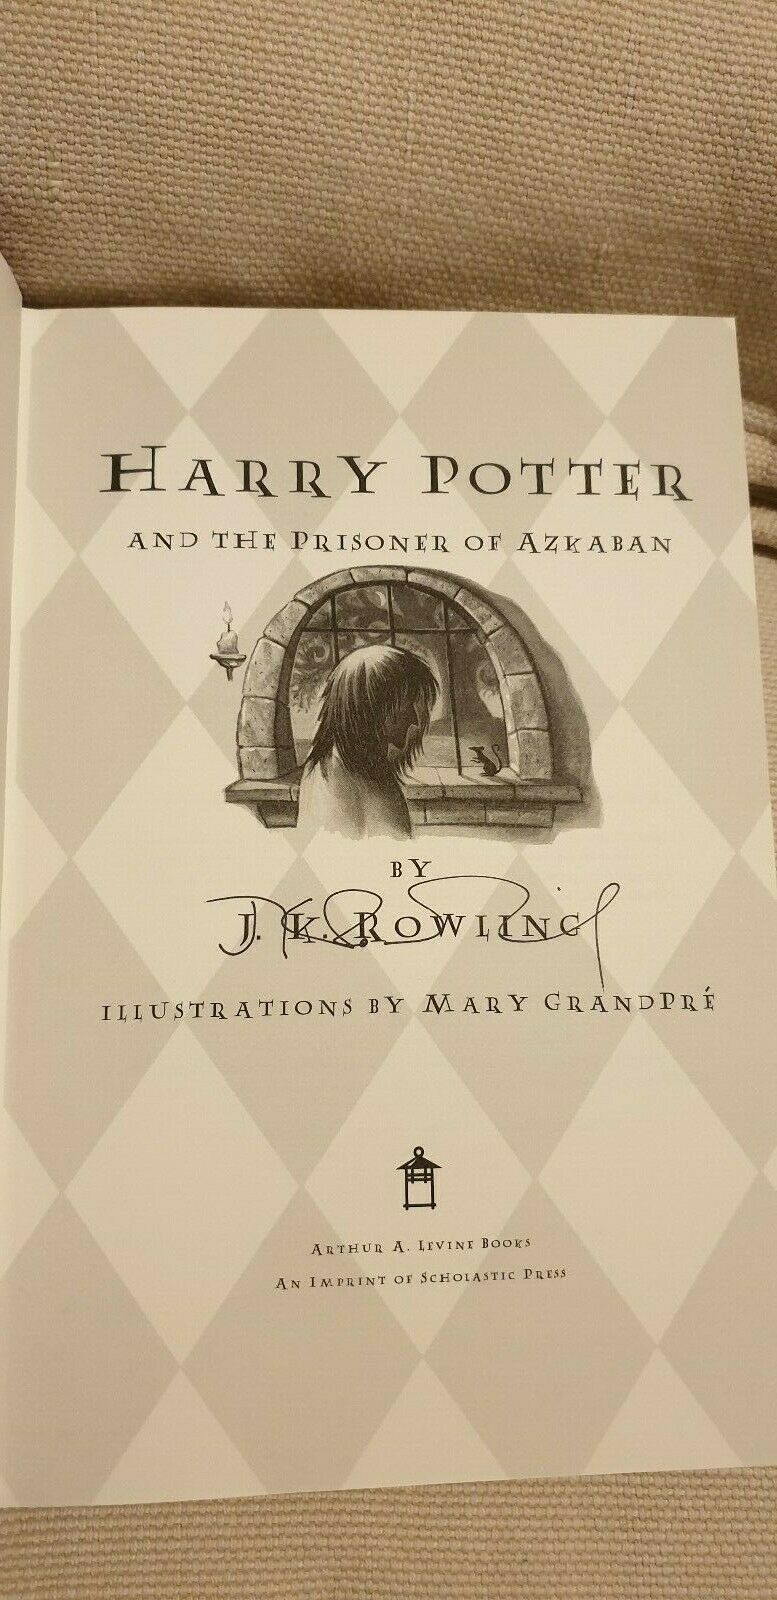 J.K. Rowling Forgery found on eBay inside of a US 1st Edition of Harry Potter and the Prisoner of Azkaban